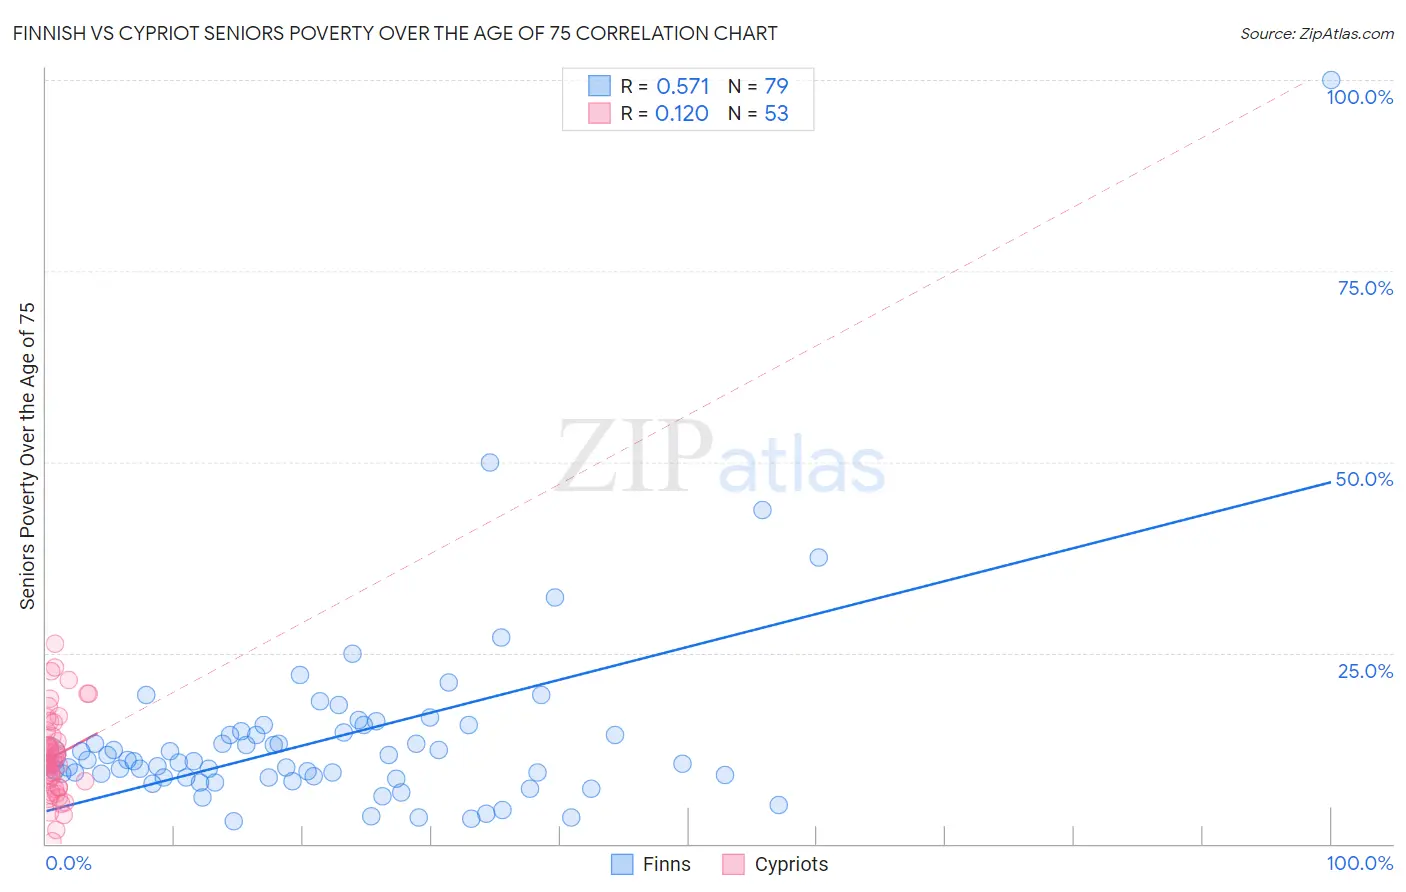 Finnish vs Cypriot Seniors Poverty Over the Age of 75